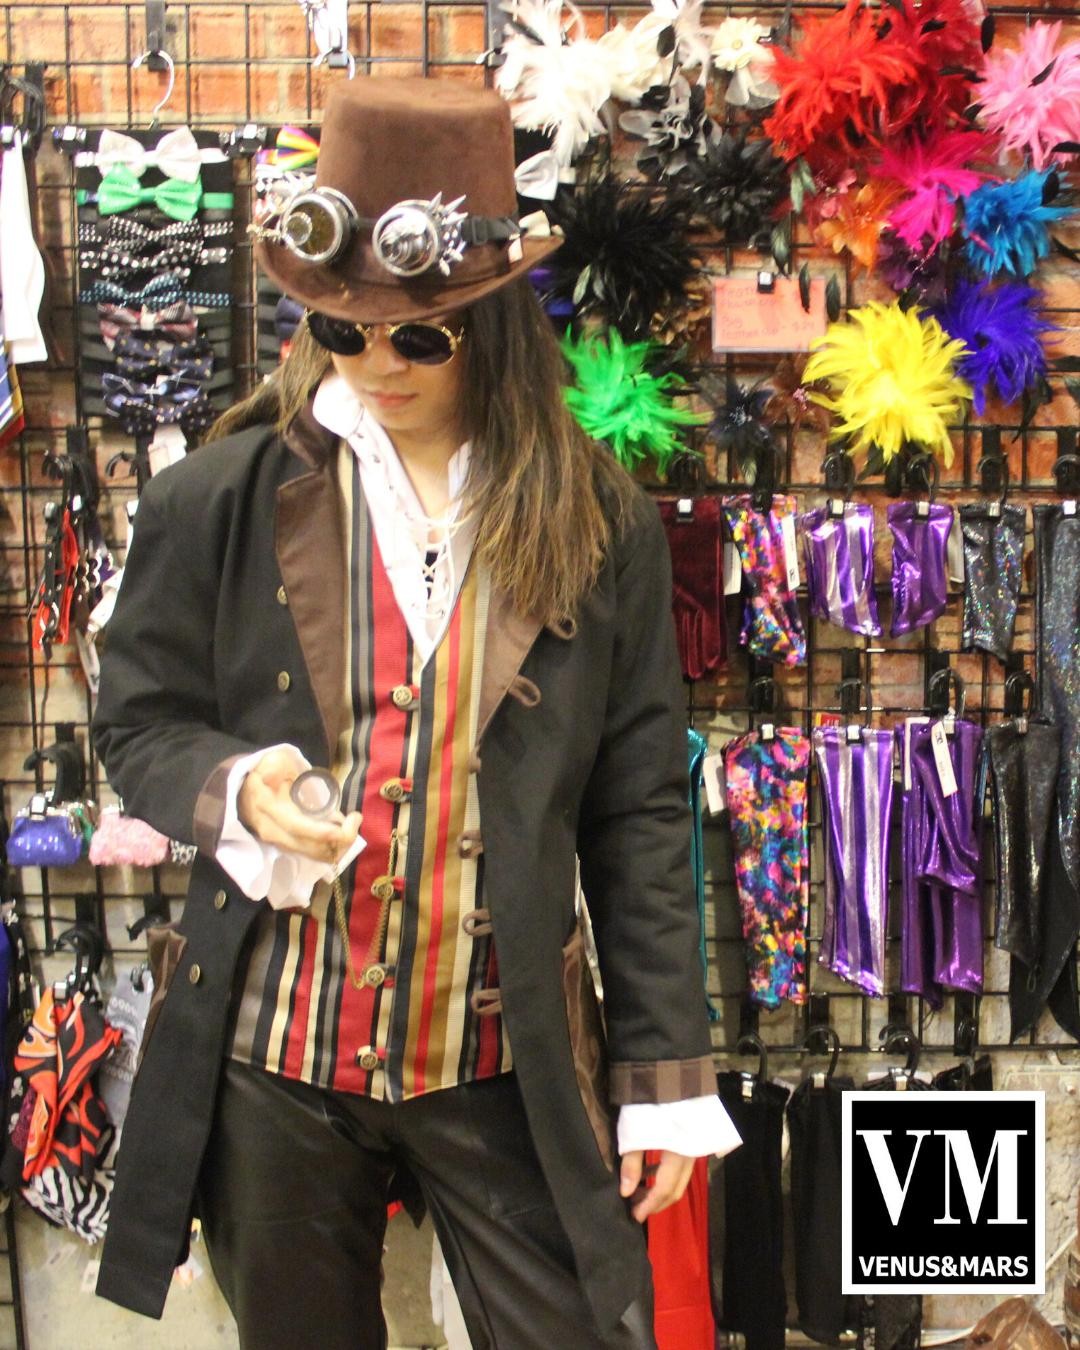 What is Steampunk?